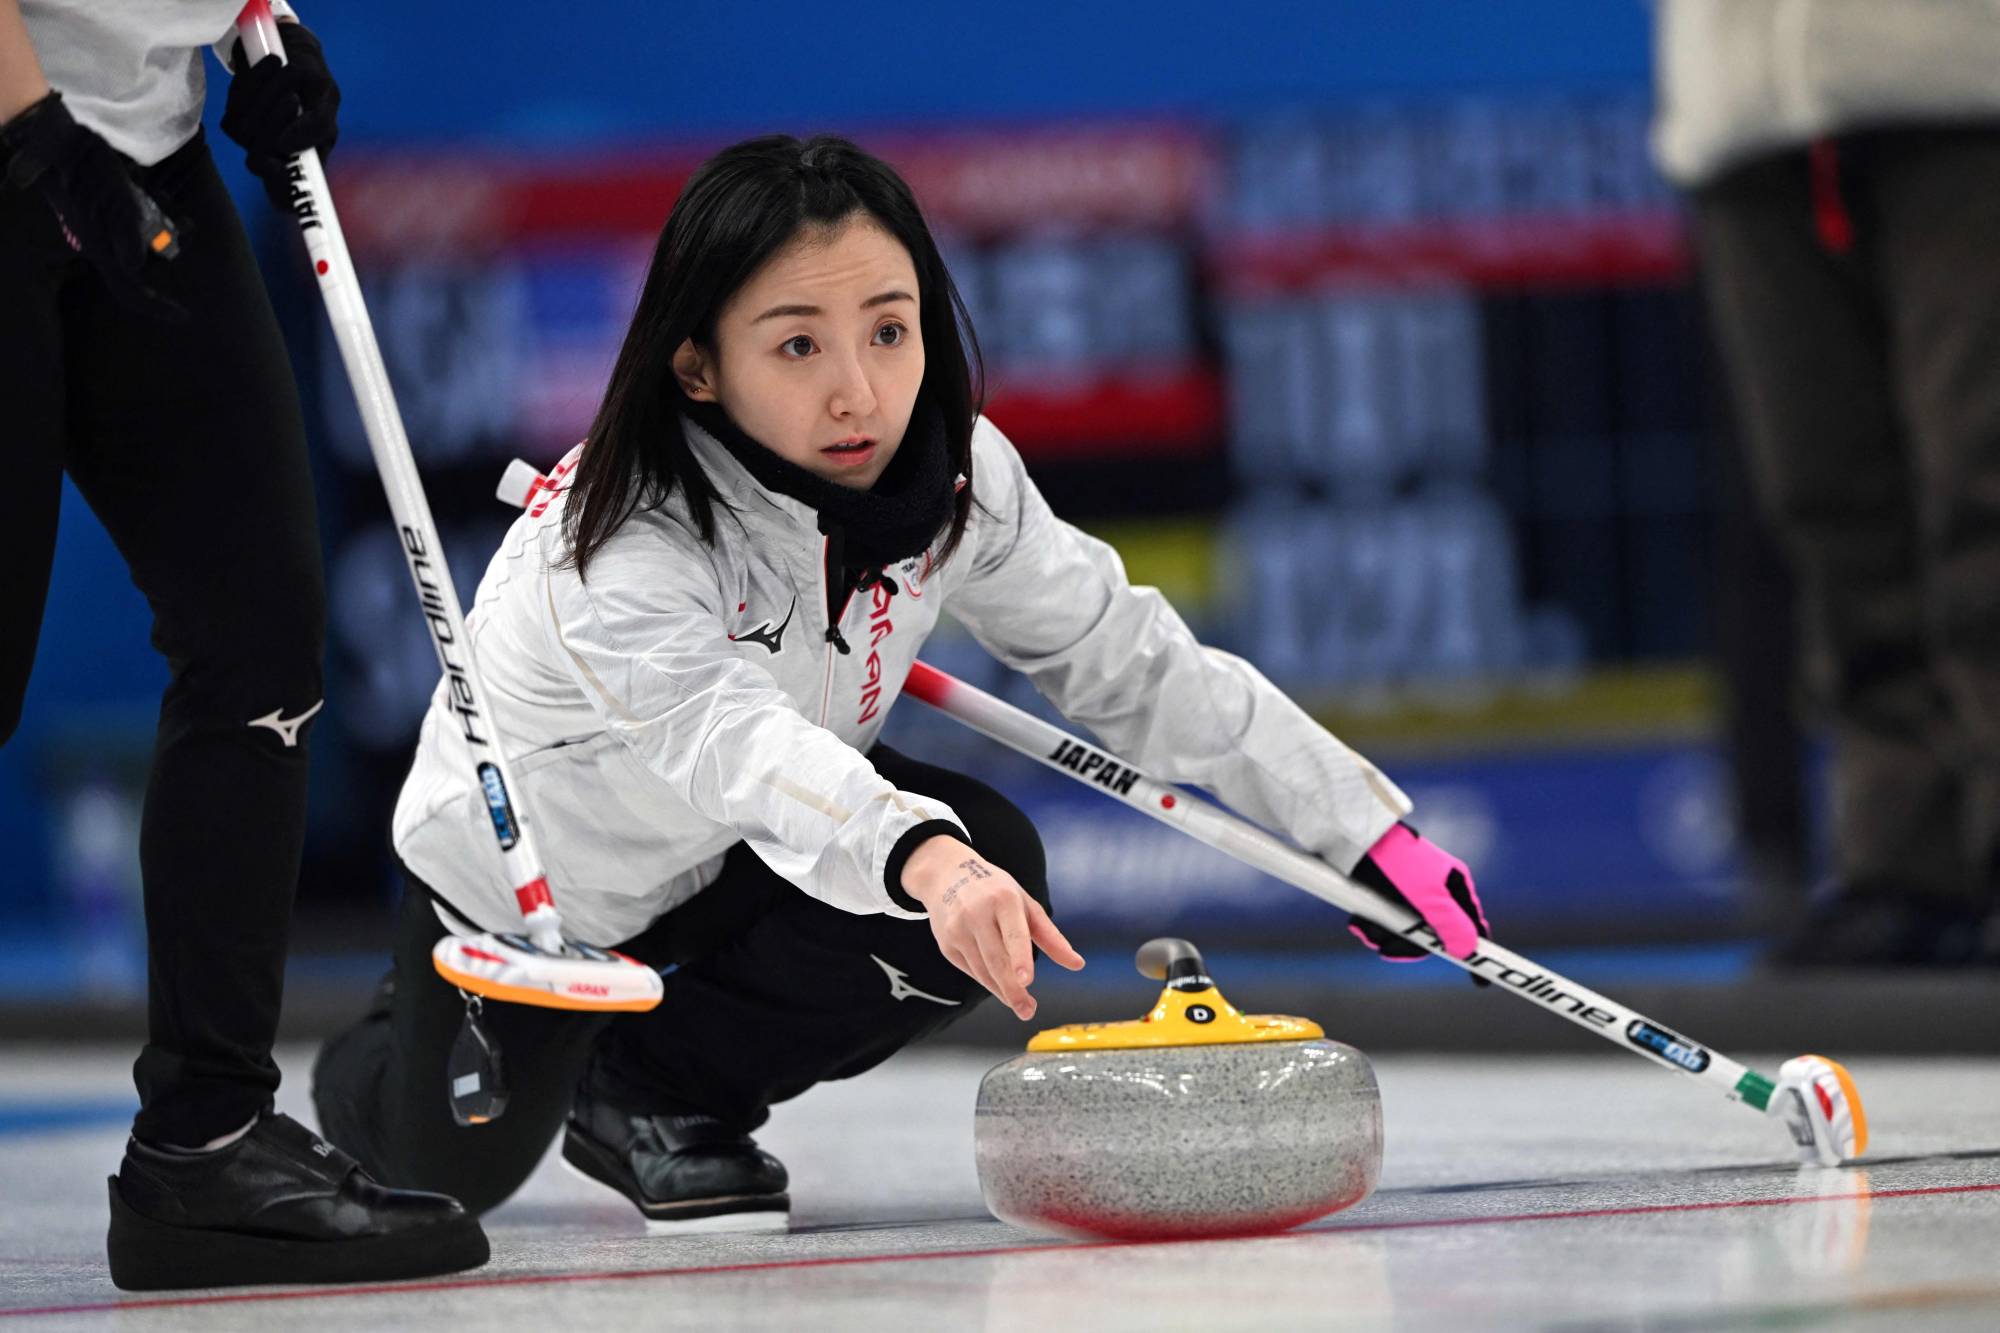 Japan loses to Great Britain in womens curling